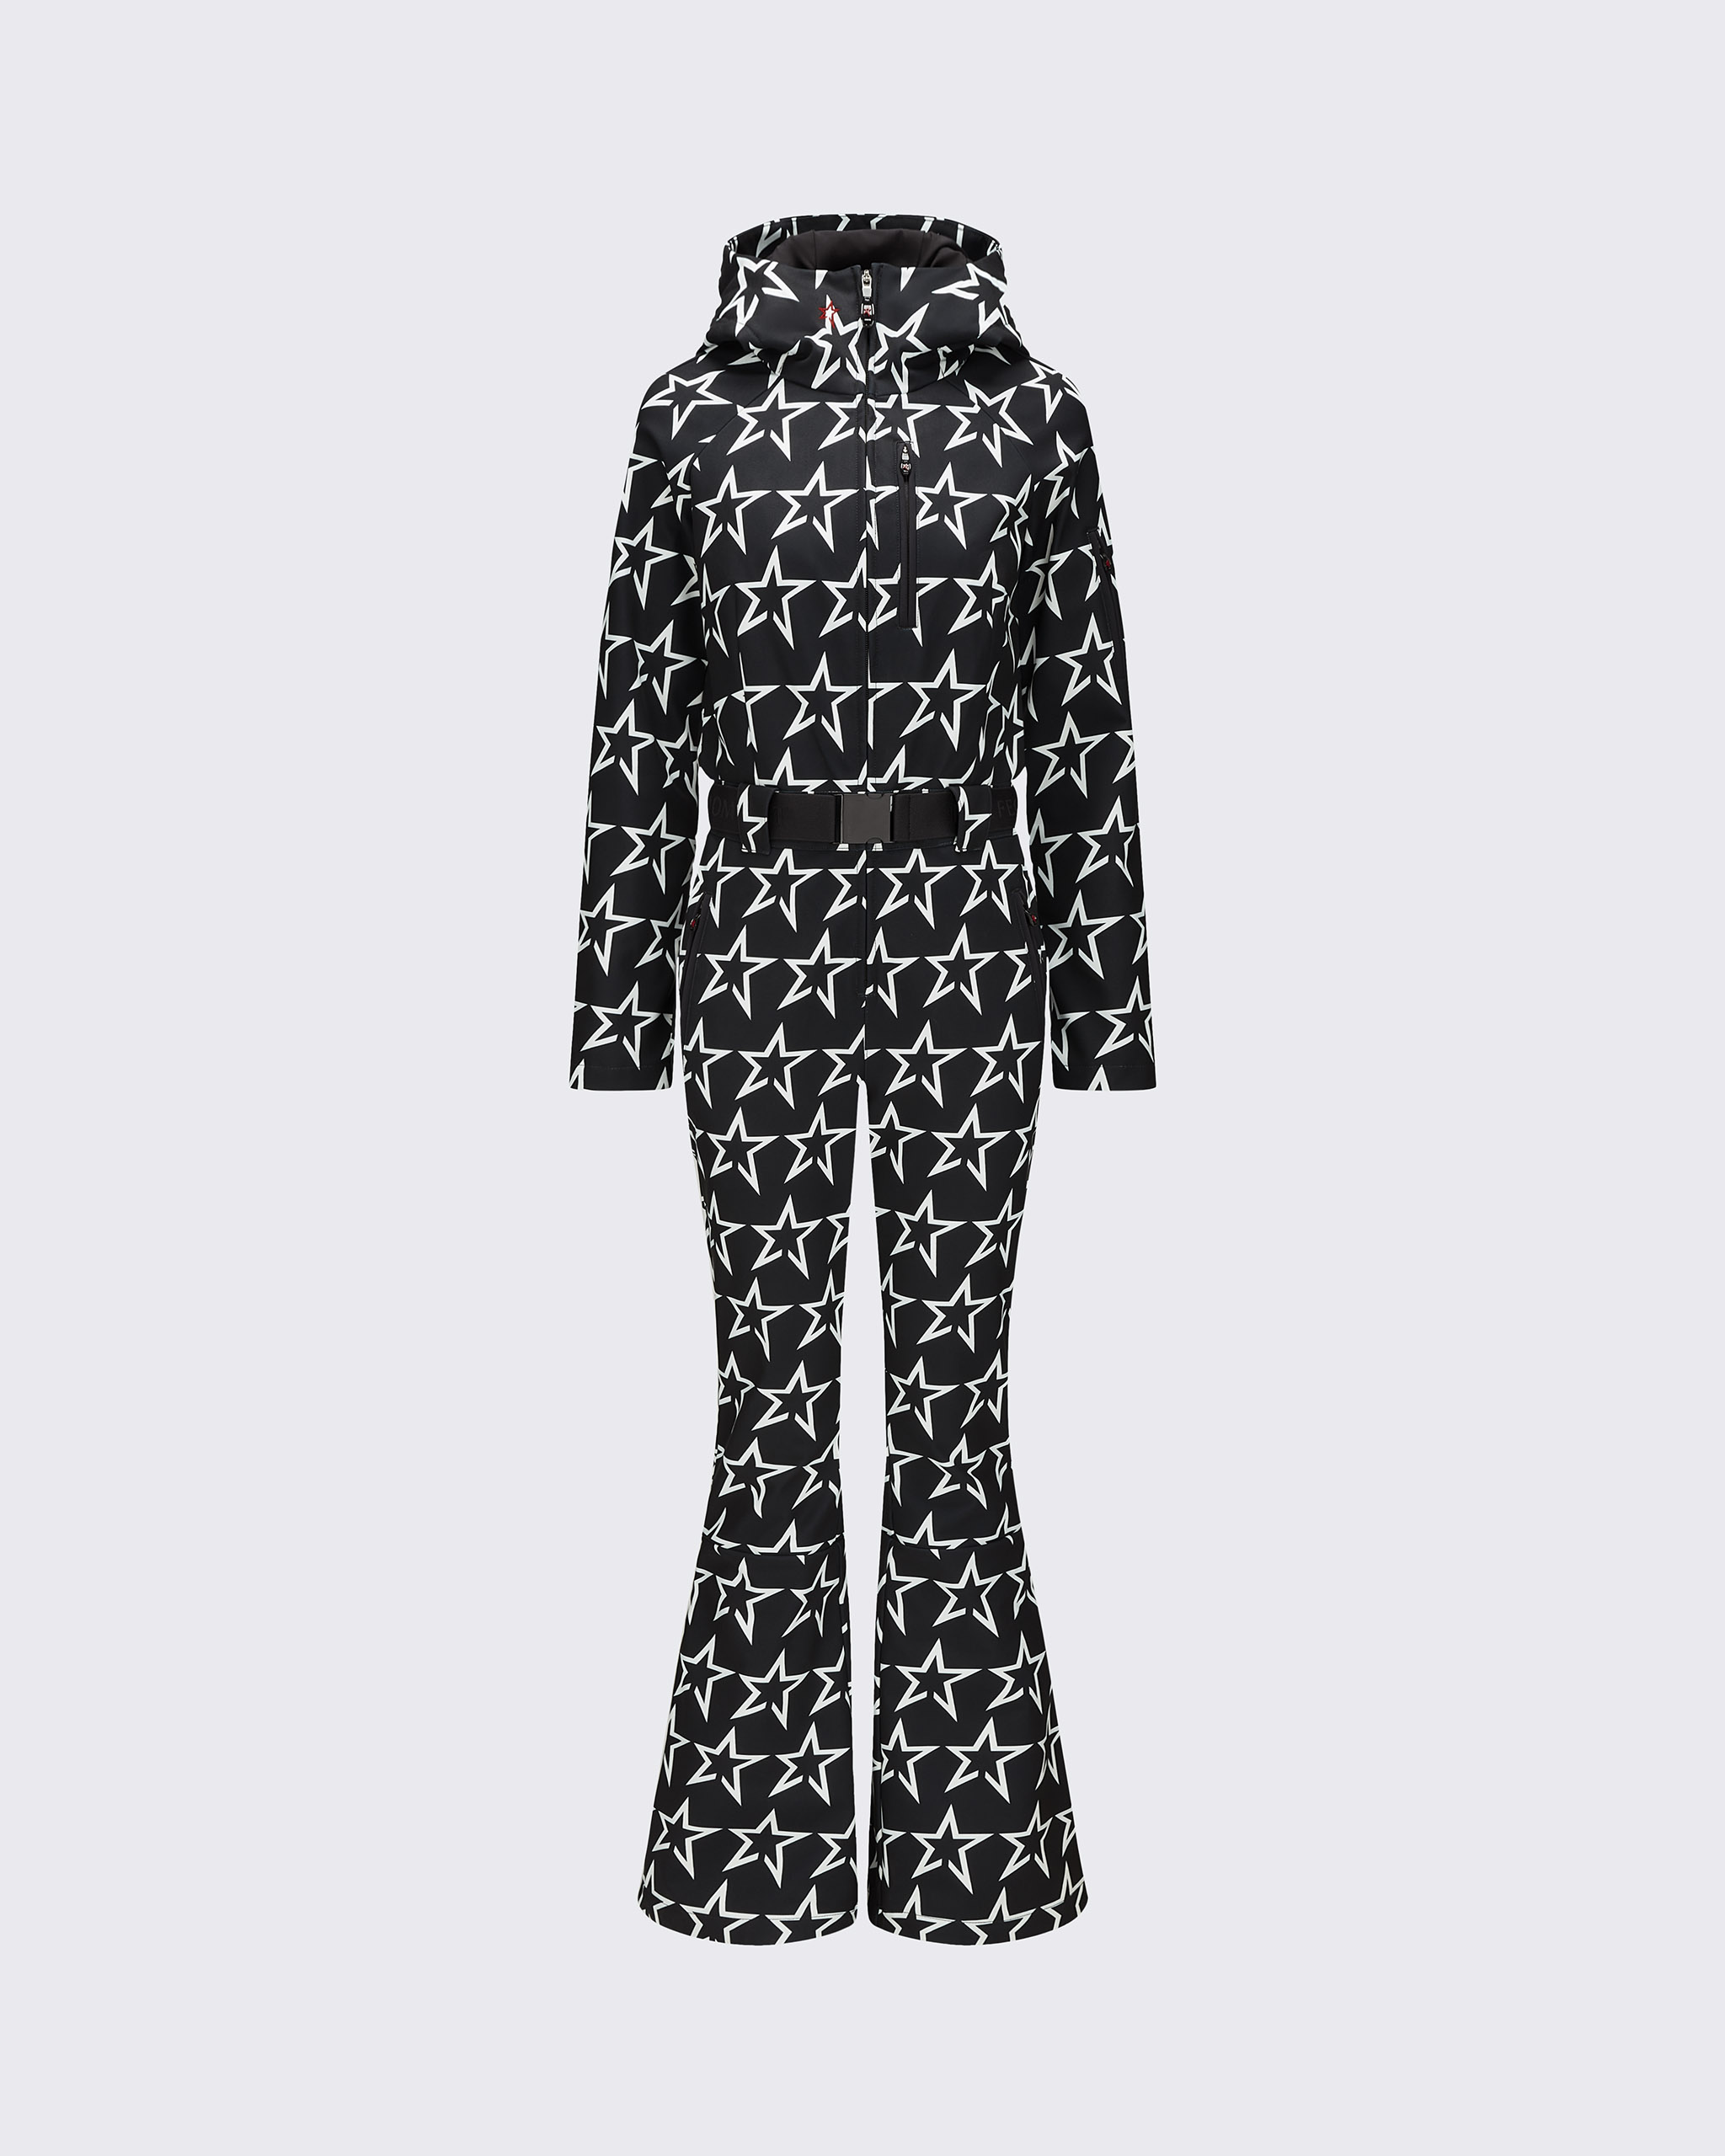 Perfect Moment Star Ski Suit In Black